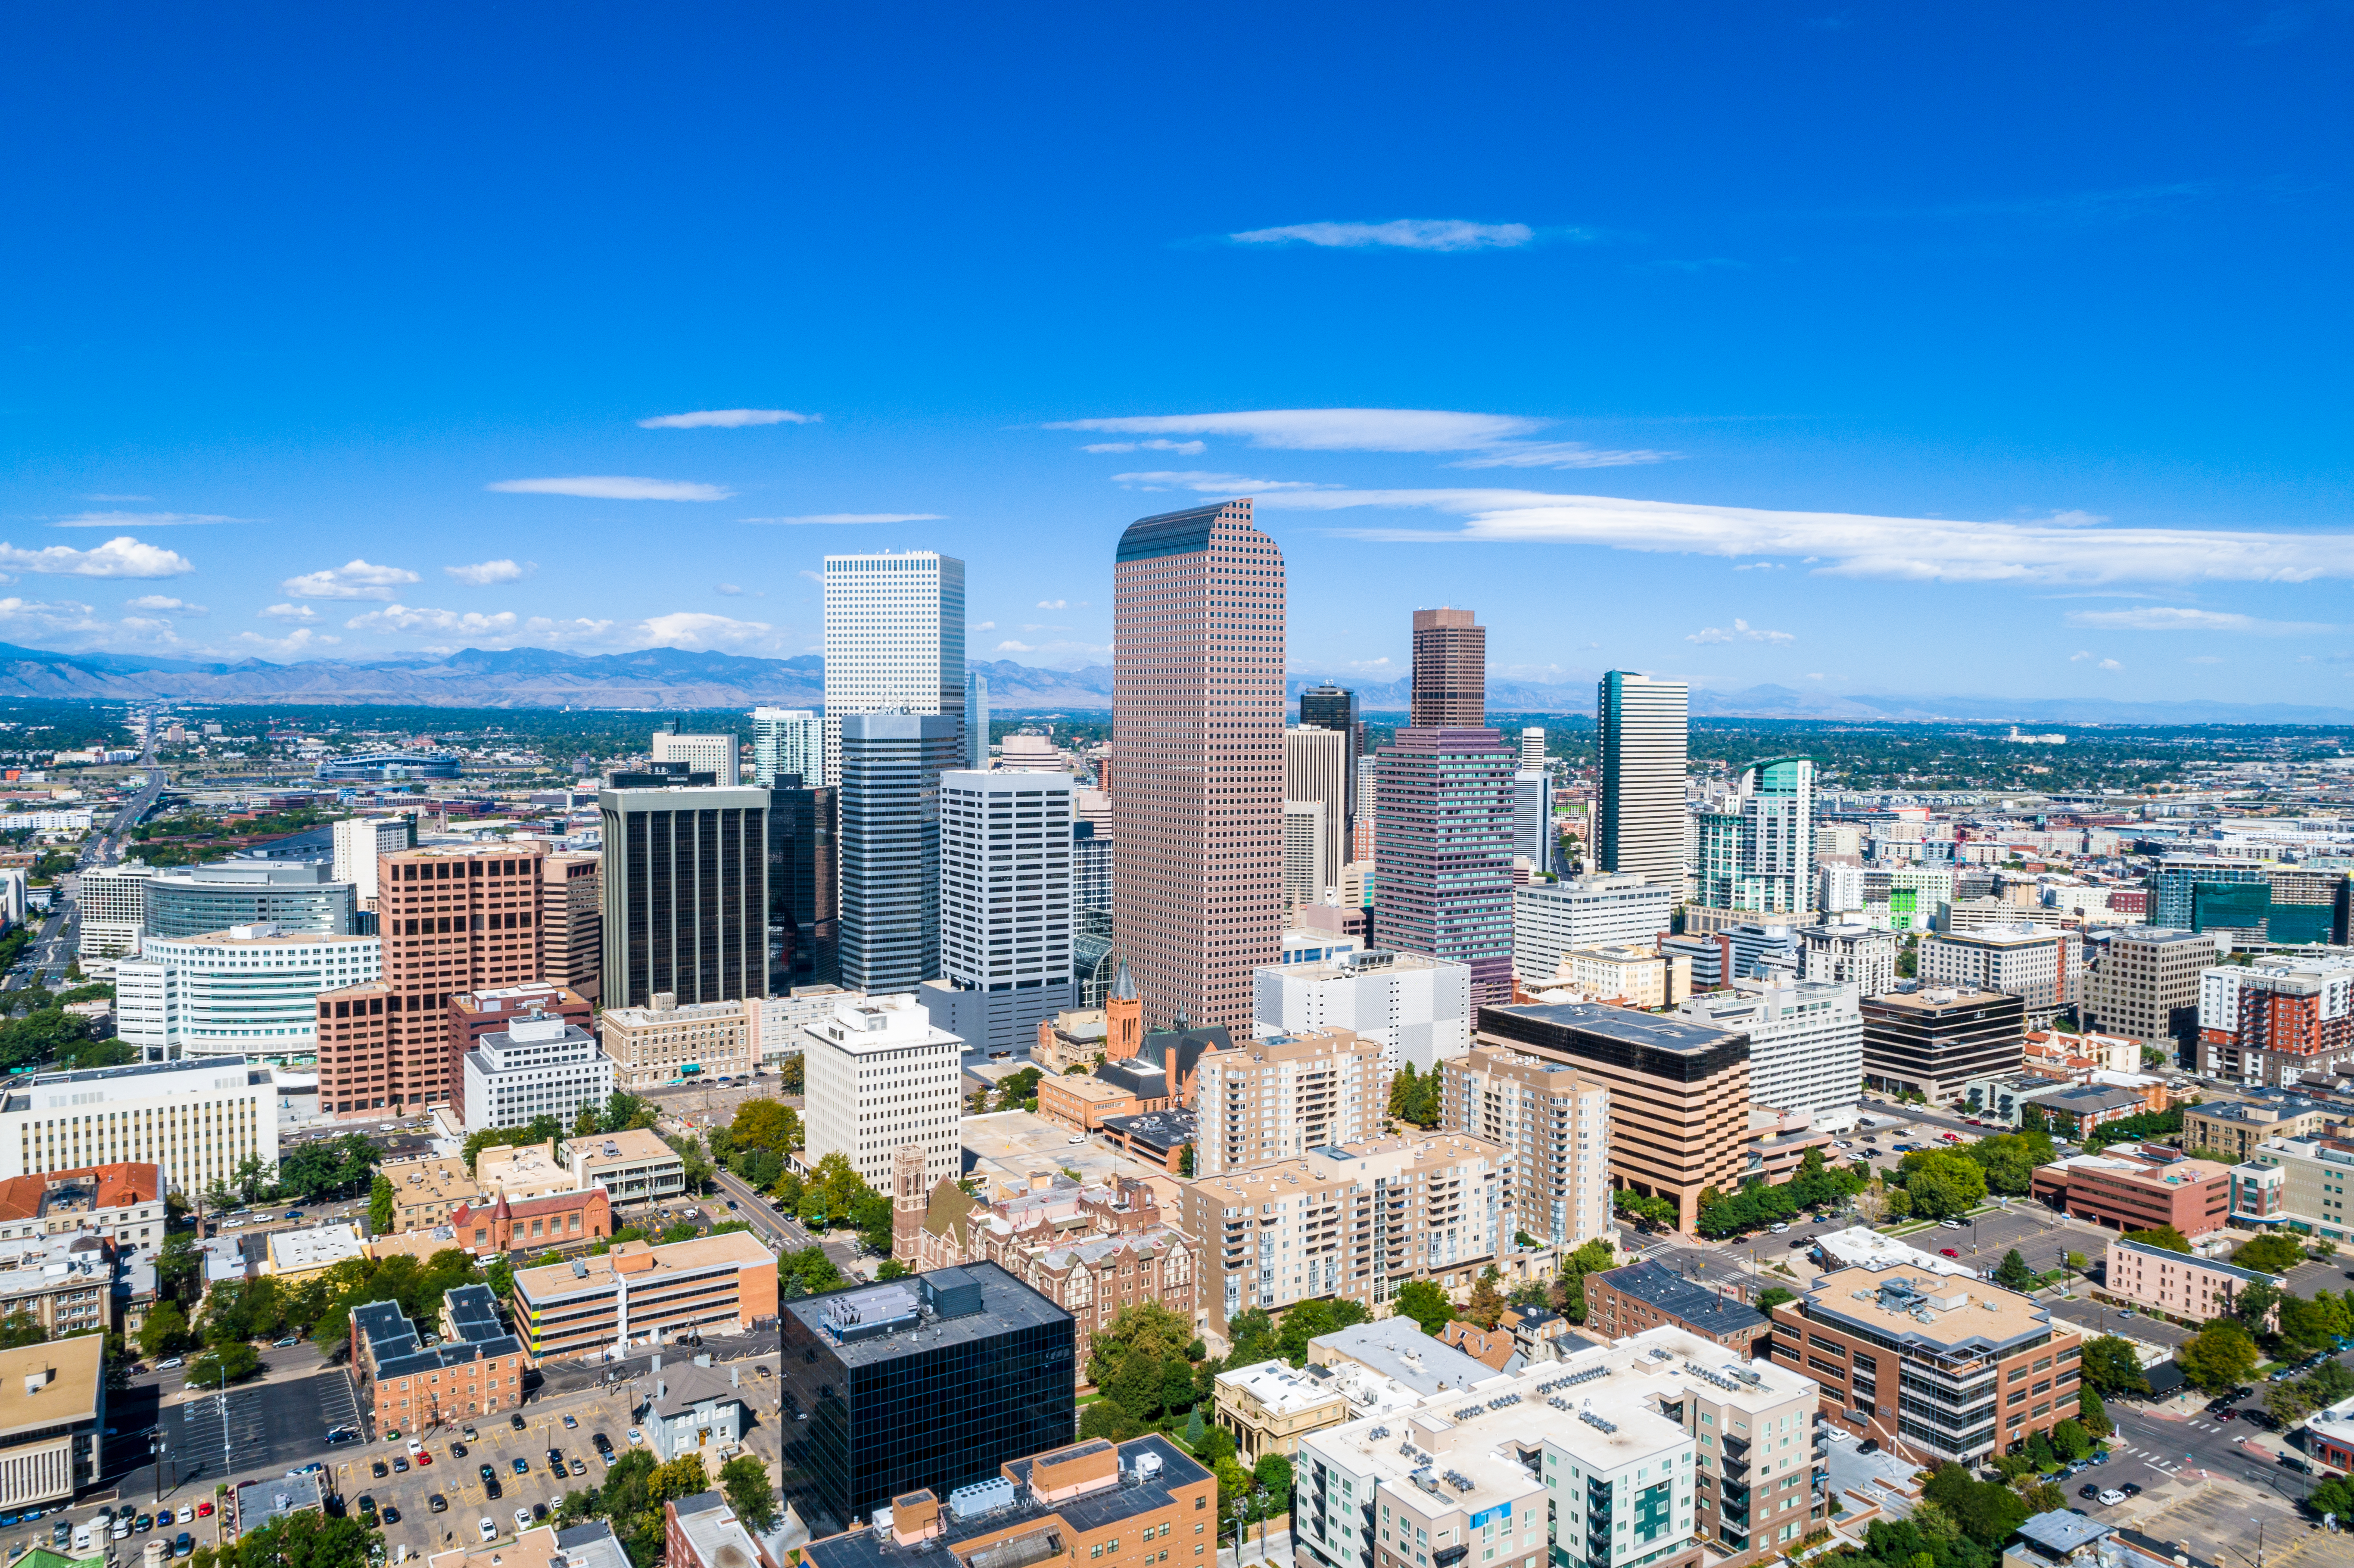 Aerial Drone view high above Denver , Colorado Downtown Skyline Cityscape August 2018 August Summer in the Mile High City Skyscrapers rise up in front of the Rocky Mountains and Colorado State Capitol building